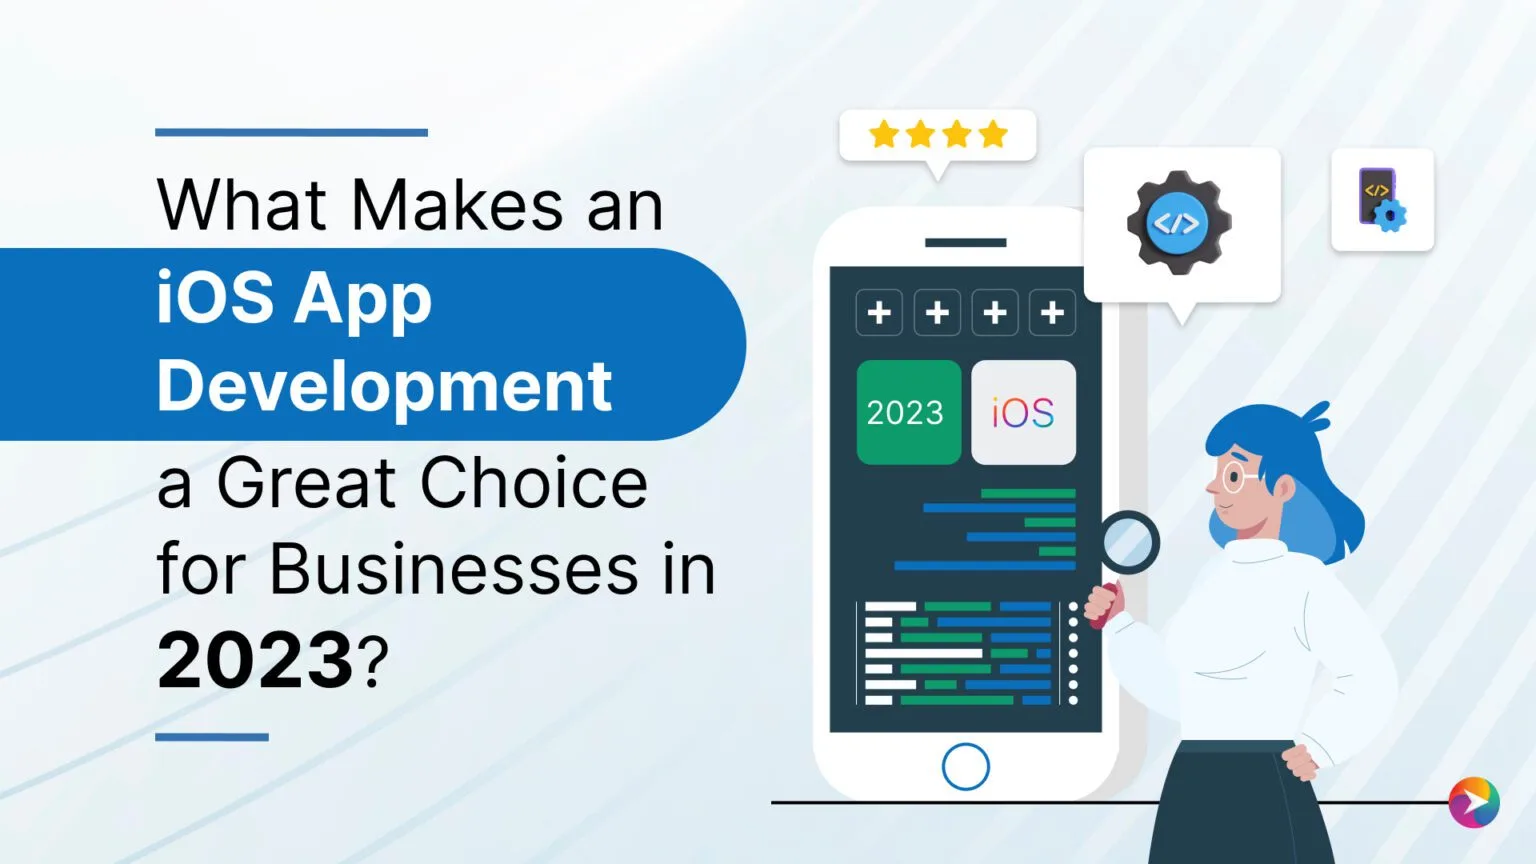 What Makes iOS App Development a Great Choice for Businesses in 2023?